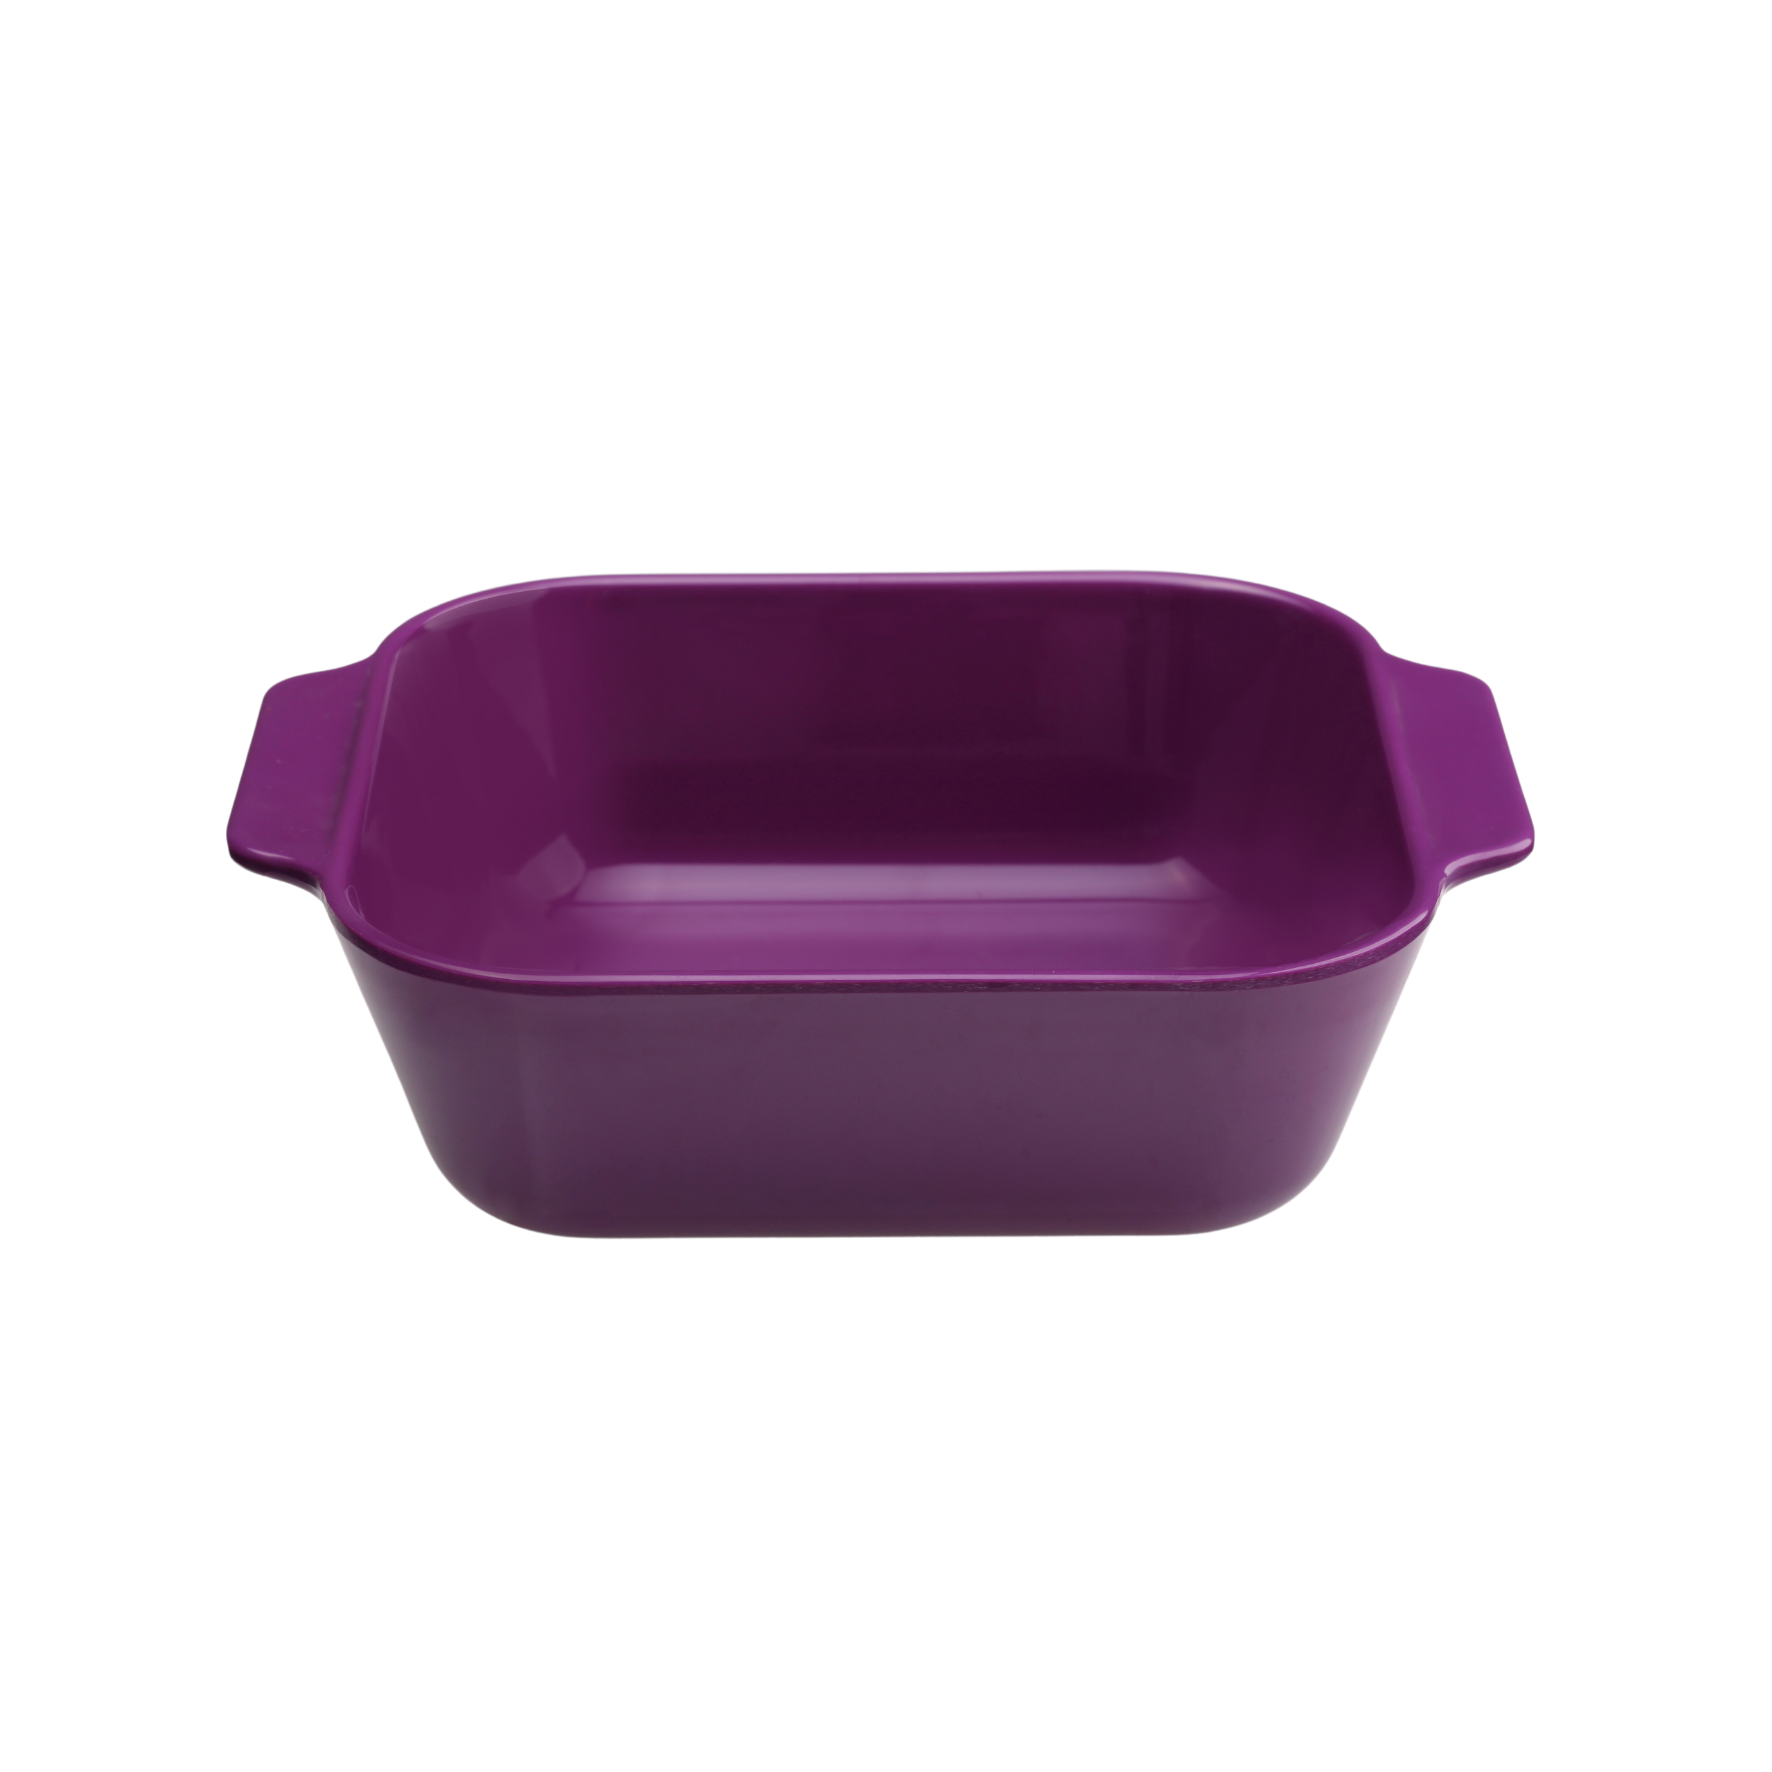 The Plate Story - Snack Bowl with Handle 7” for Toddler - Cadbury Purple